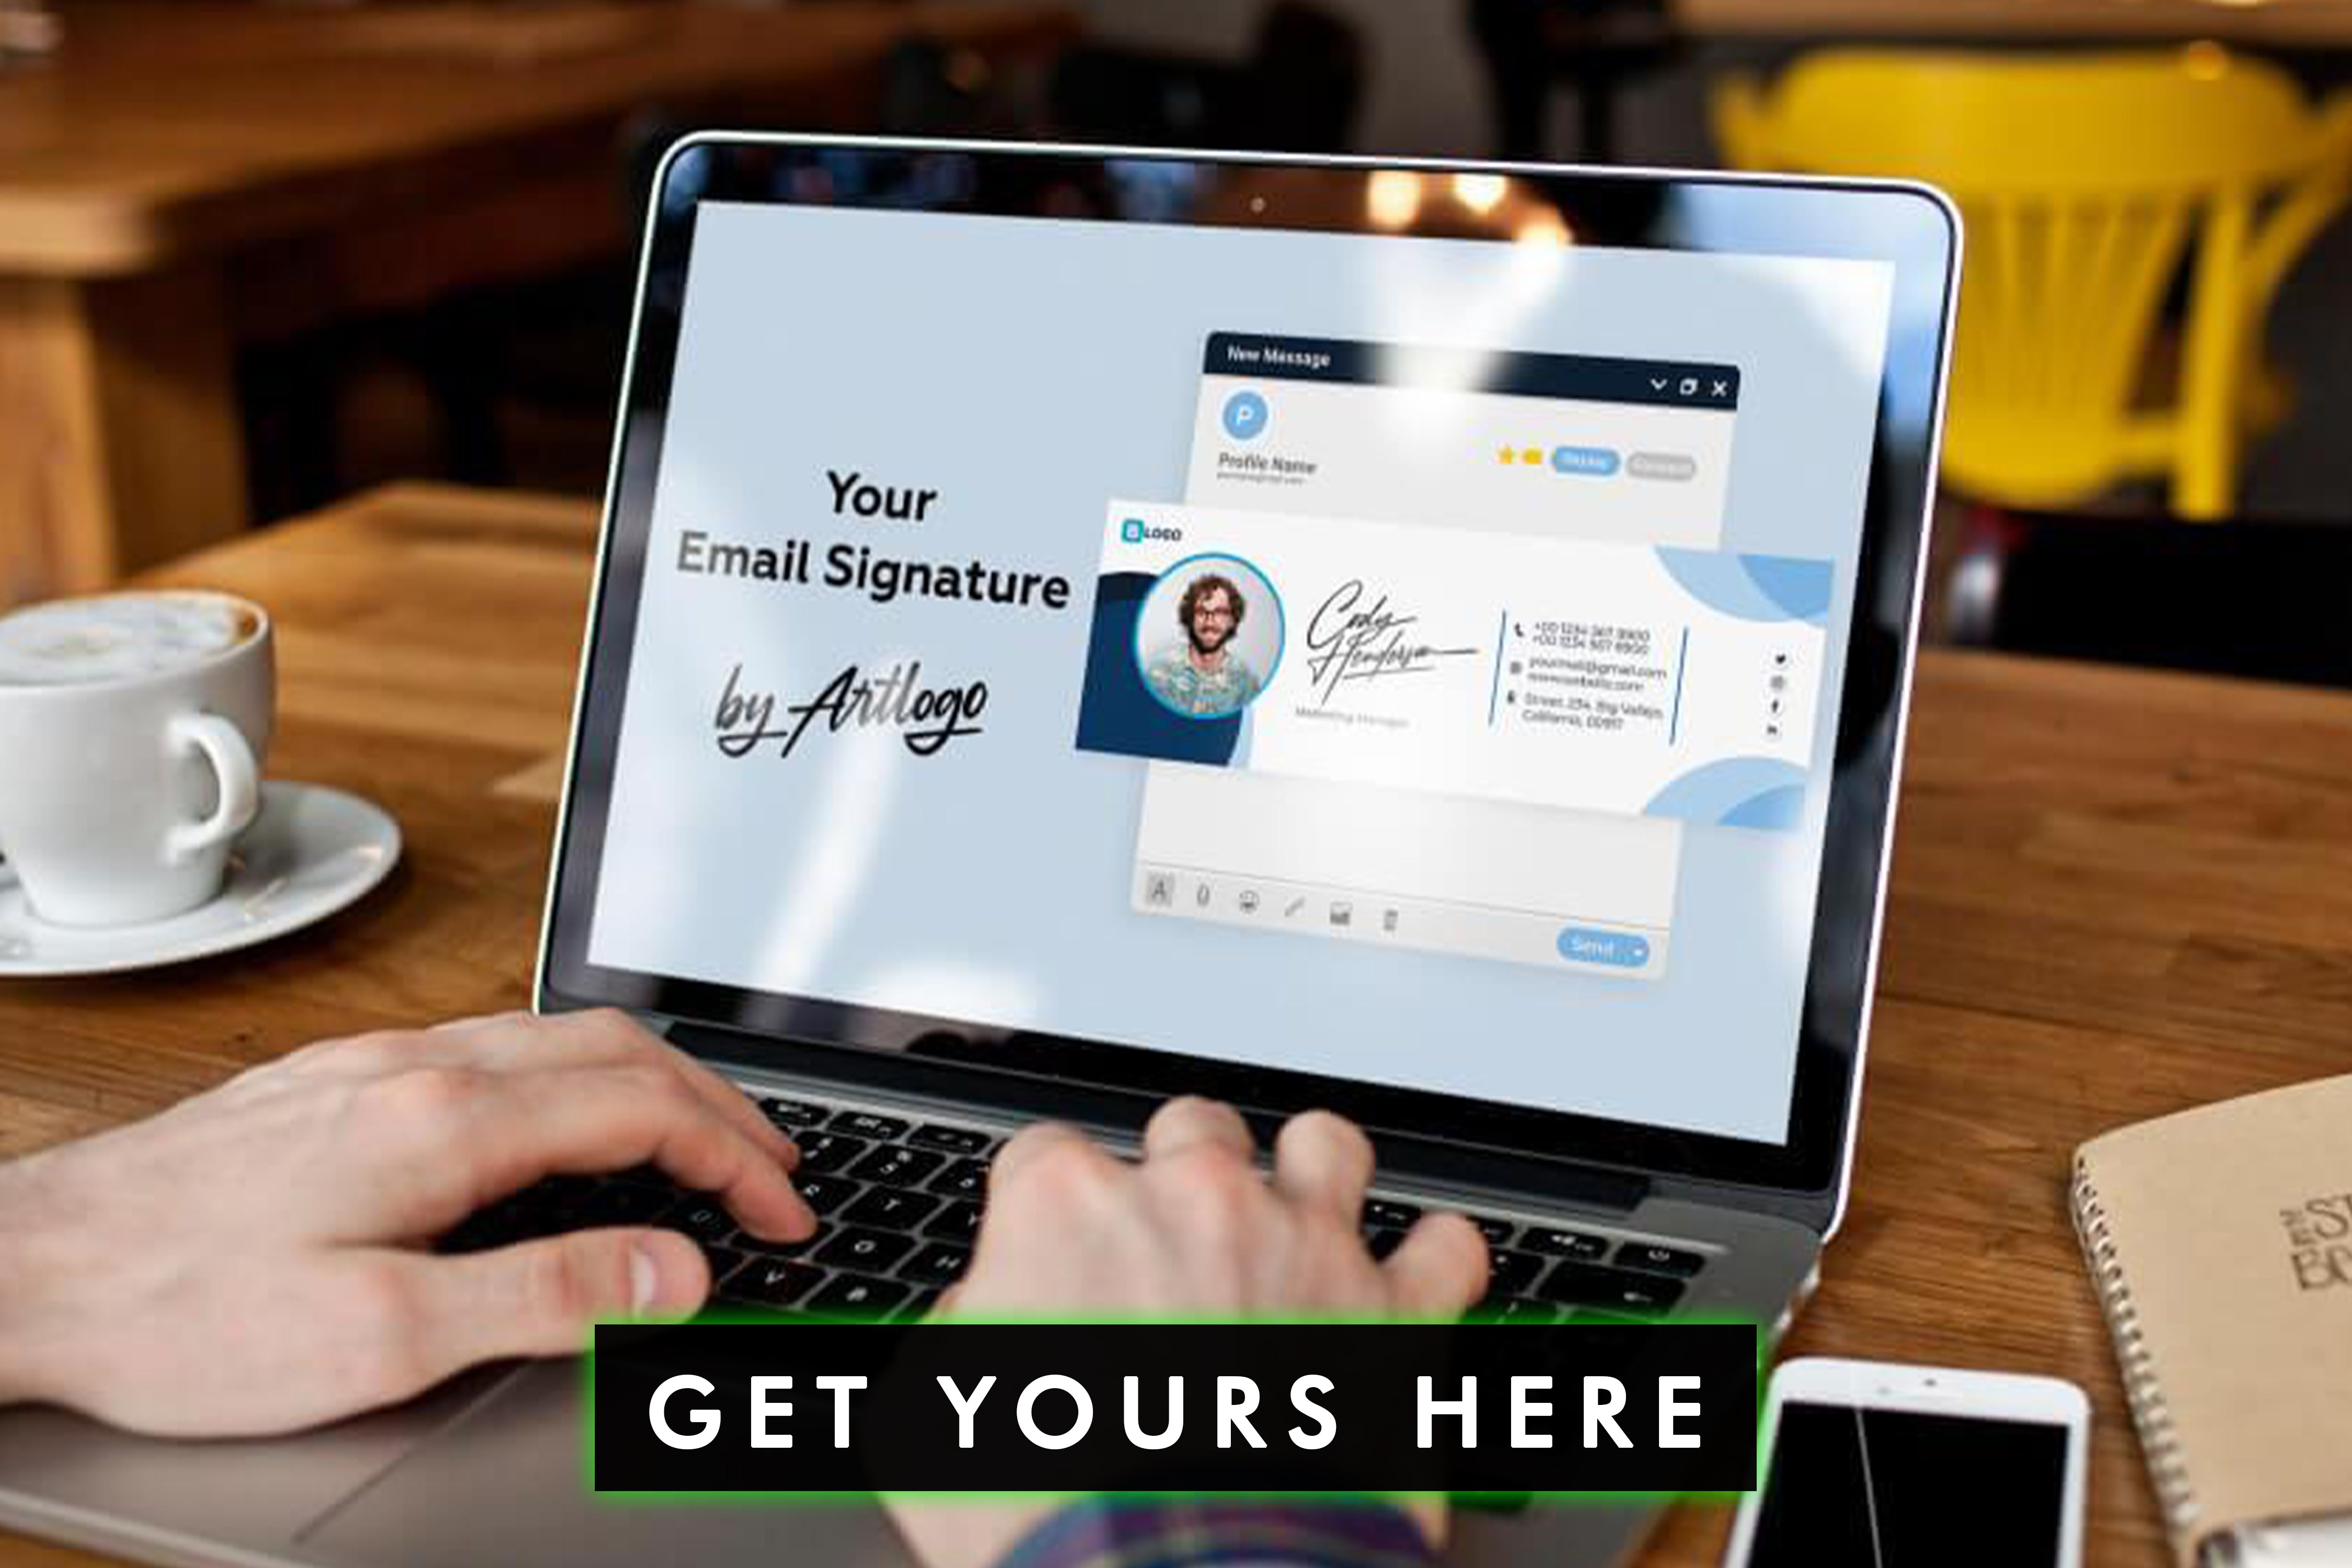 Boost your professional image with our collection of # Gmail templates. Choose from a variety of designs to impress your recipients.